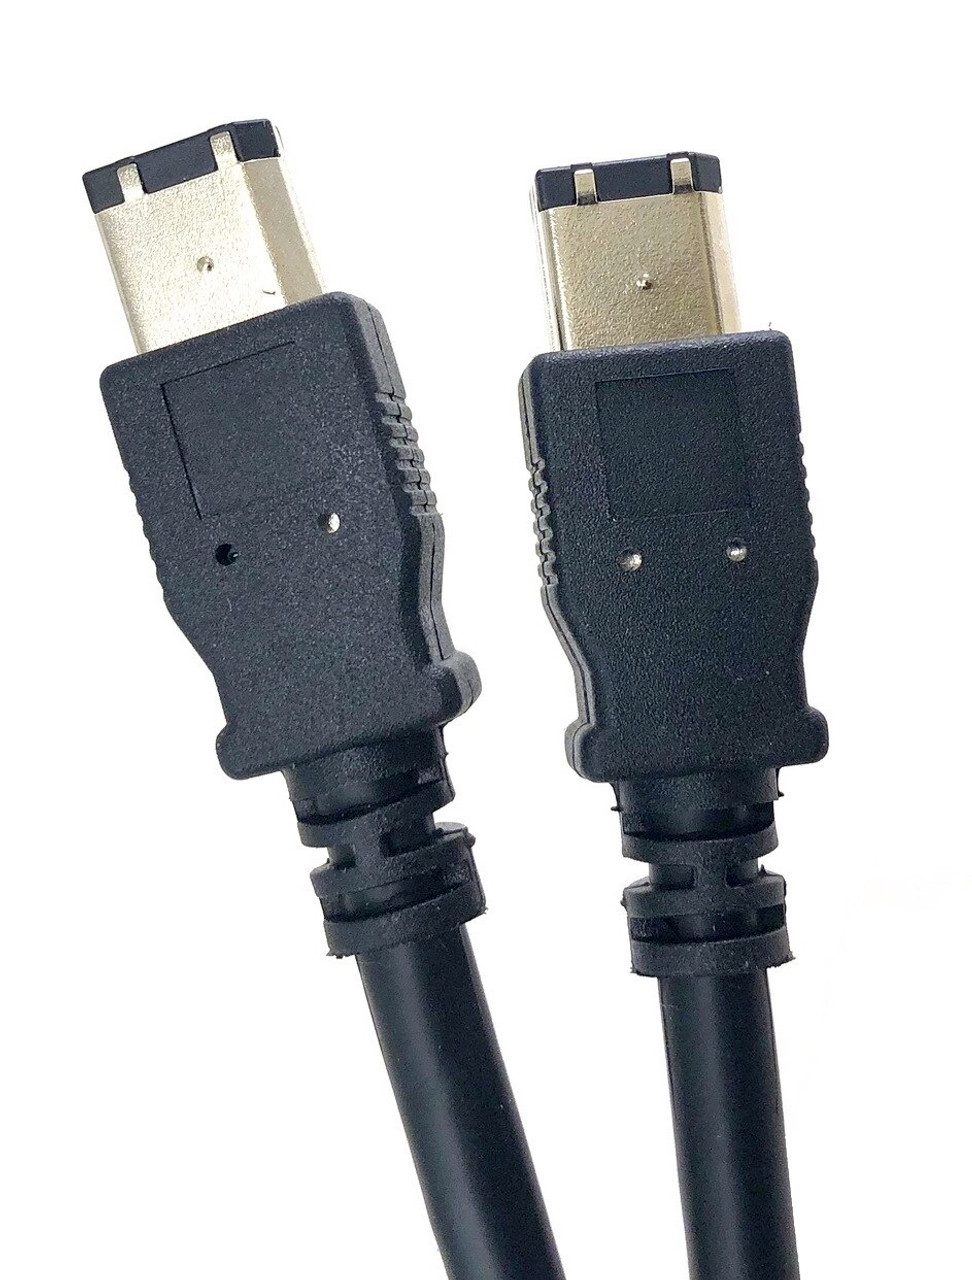 FireWire (IEEE 1394a) 6-Pin to 6-Pin Cable